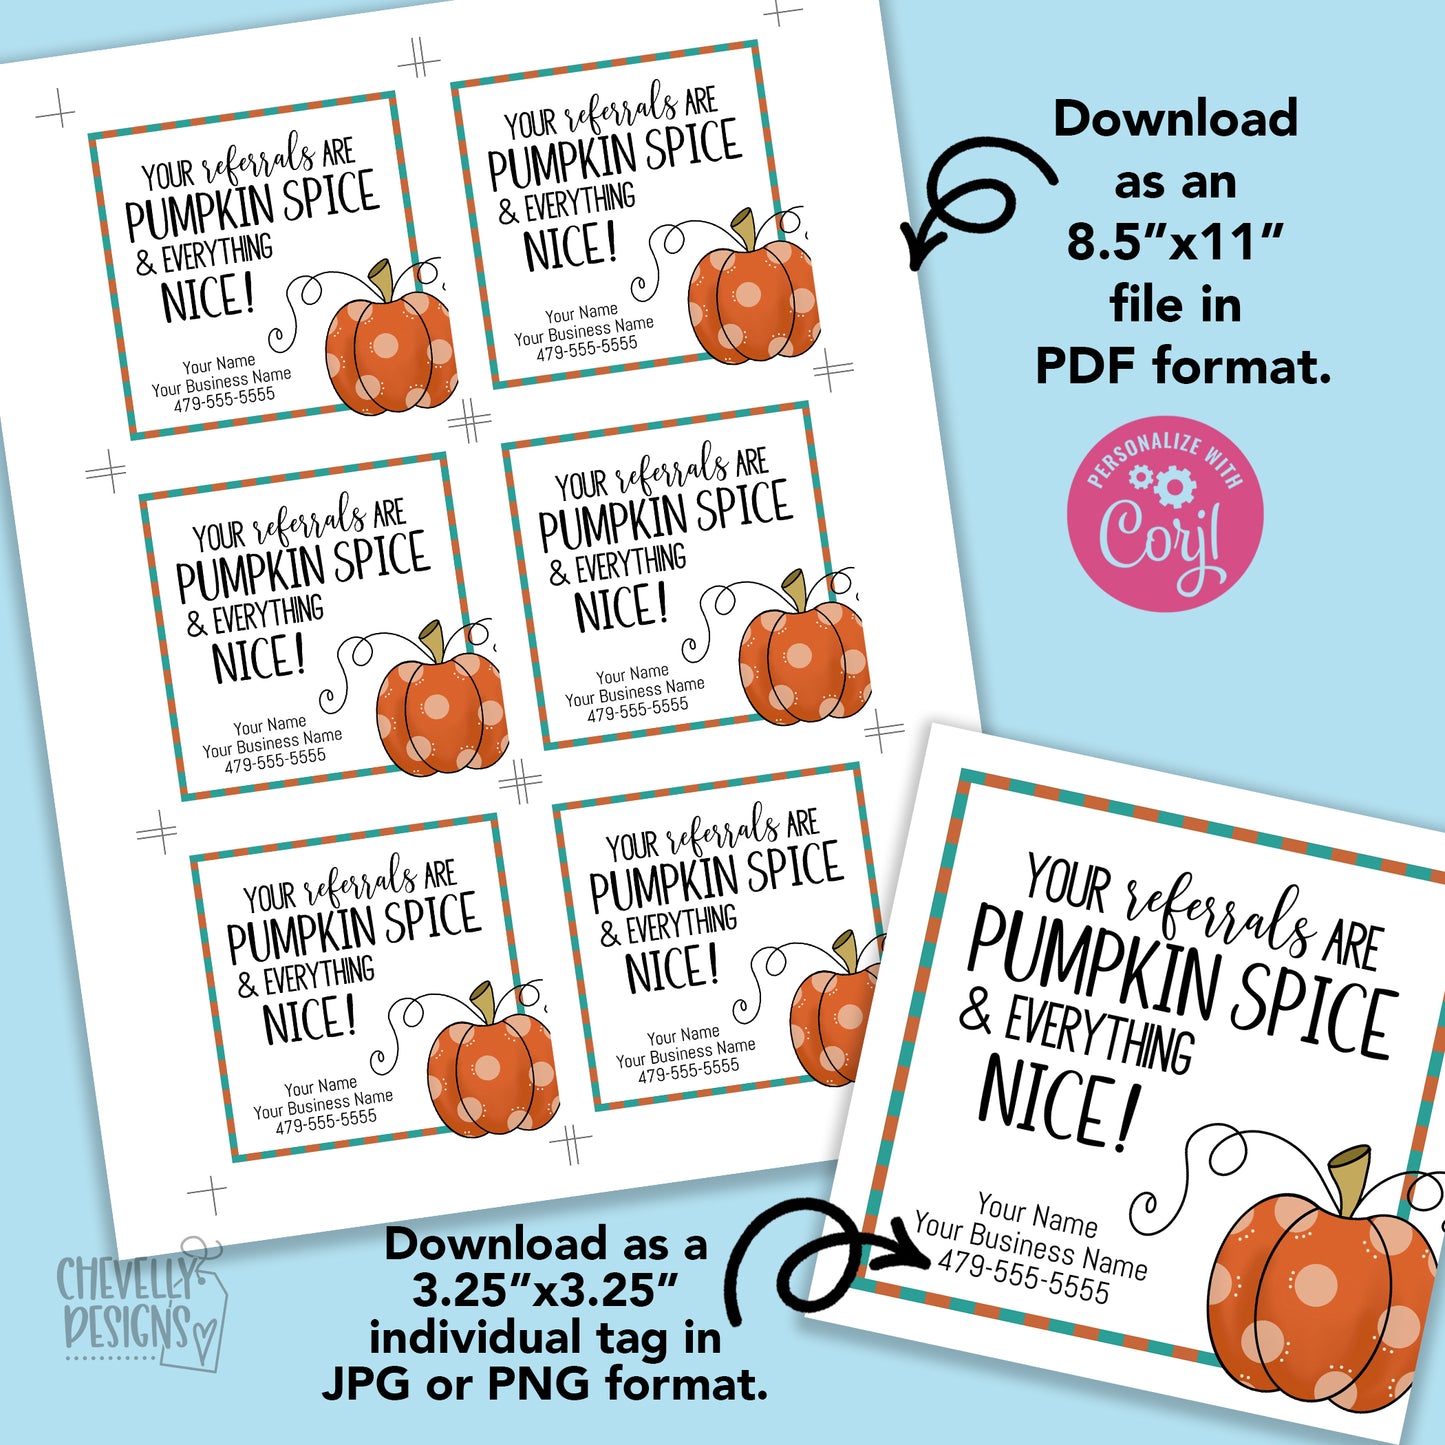 Editable - Your Referrals are Pumpkin Spic - Business Gift Tags - Printable Digital File